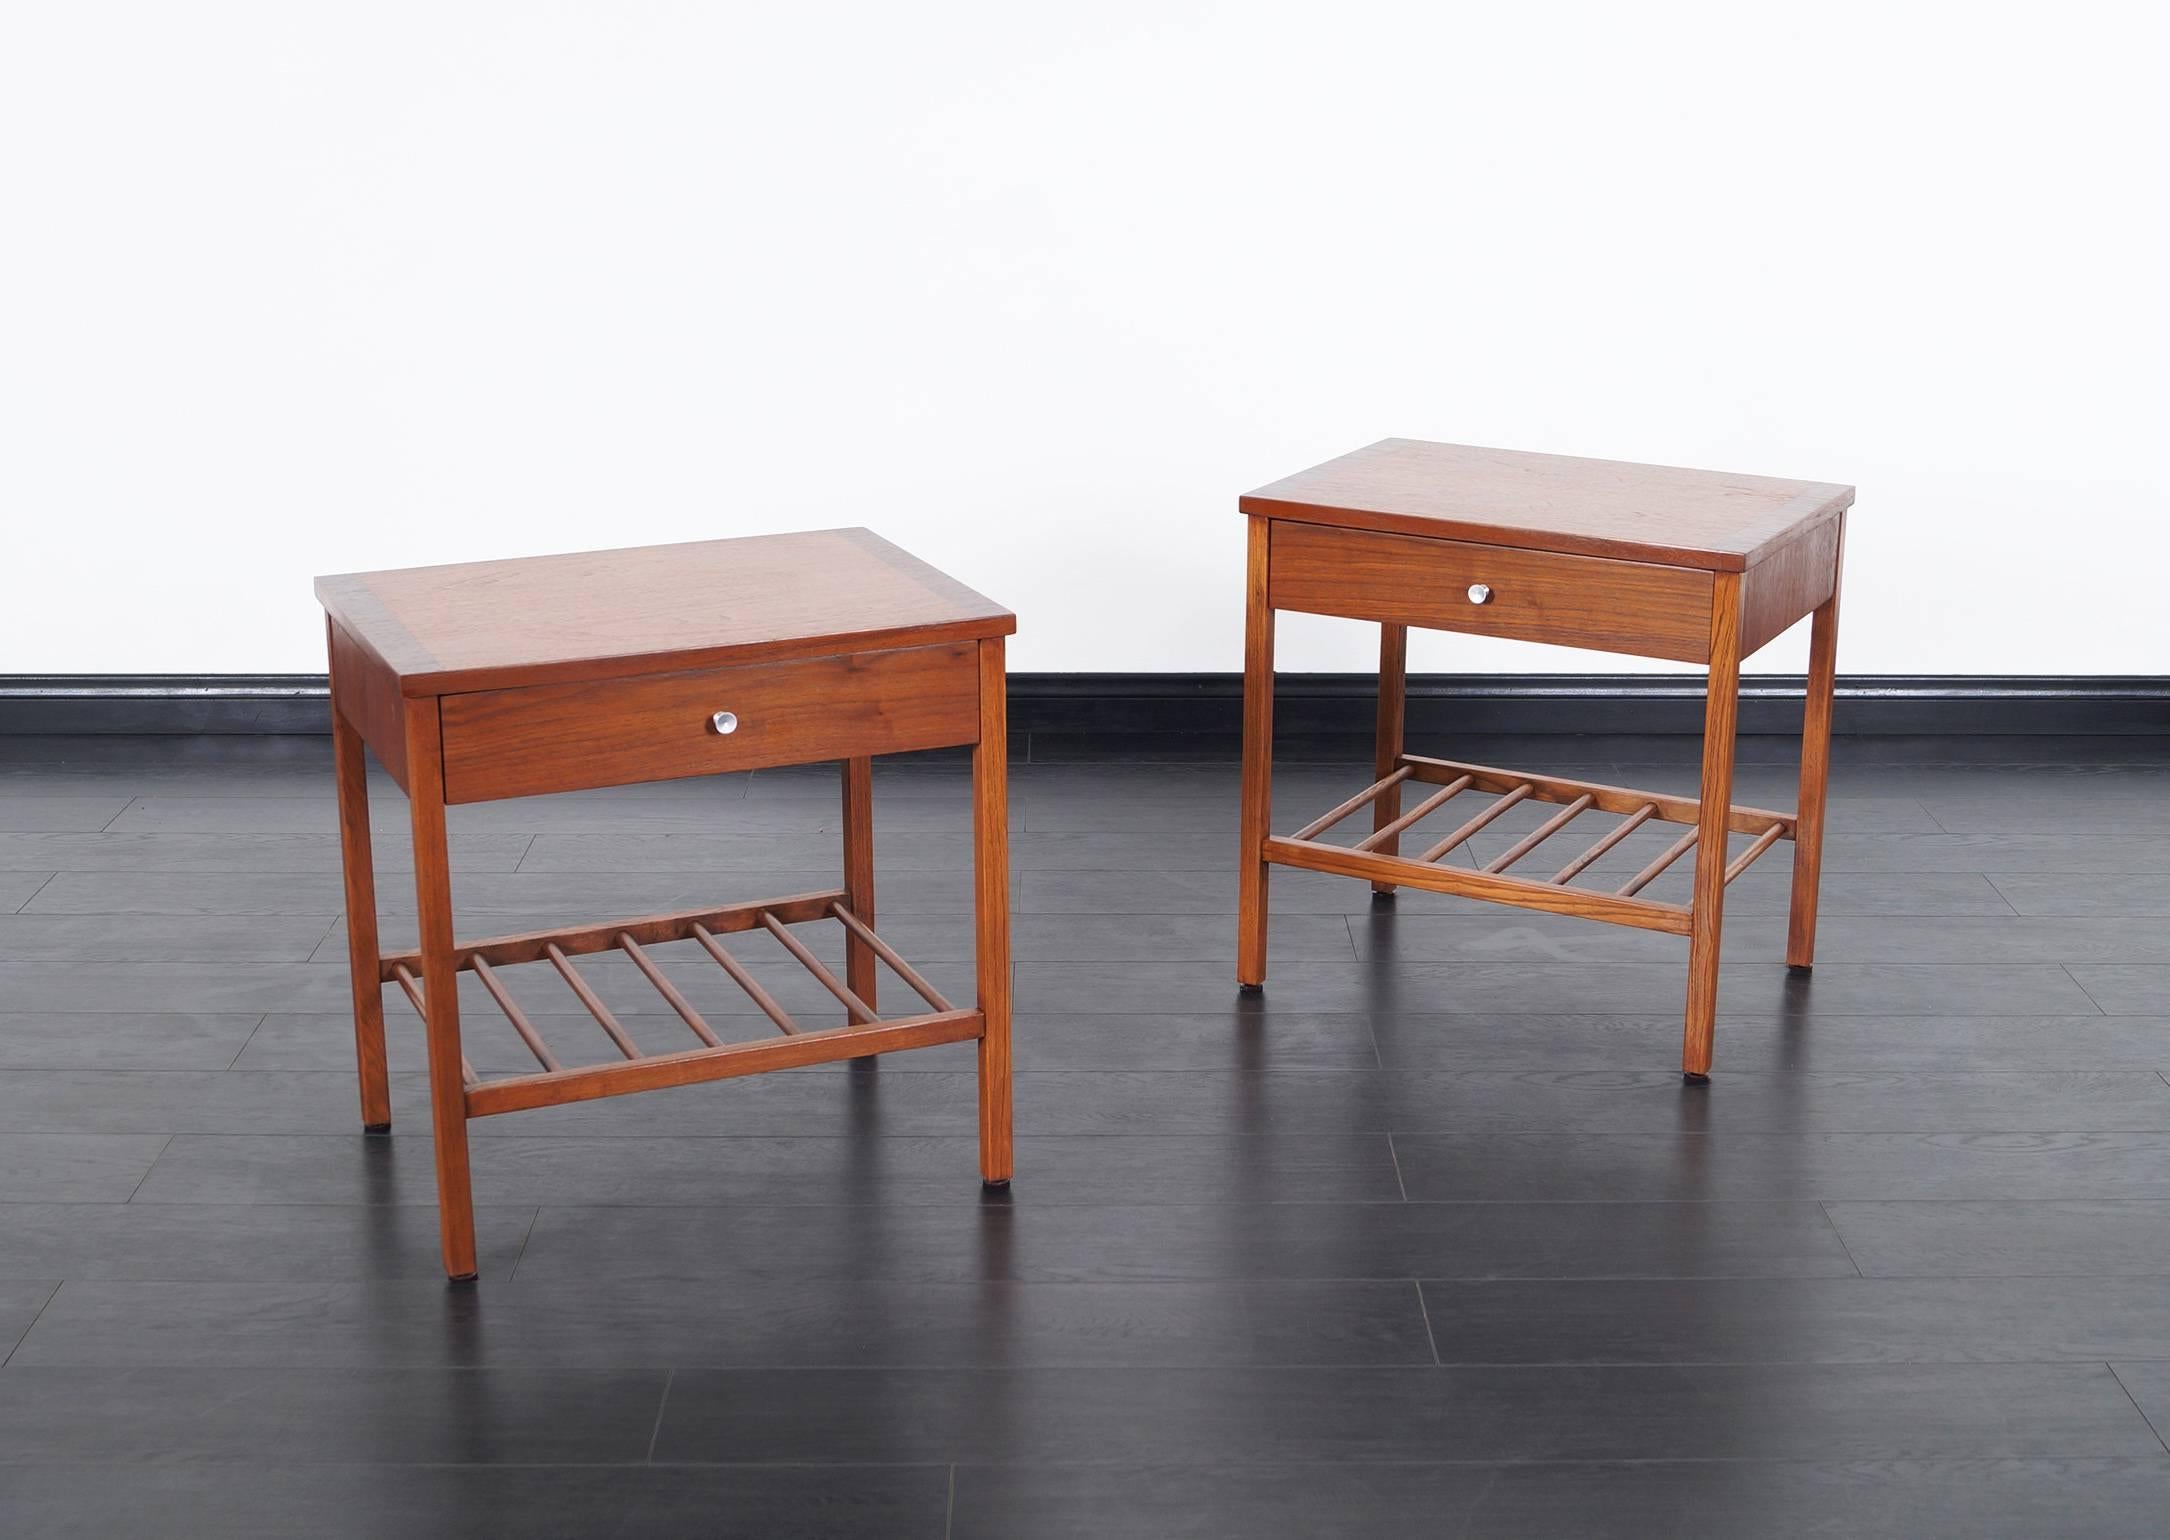 Pair of fabulous walnut and rosewood nightstands or side tables by Stanley. Each nightstand features one pull-out drawer with open storage underneath.